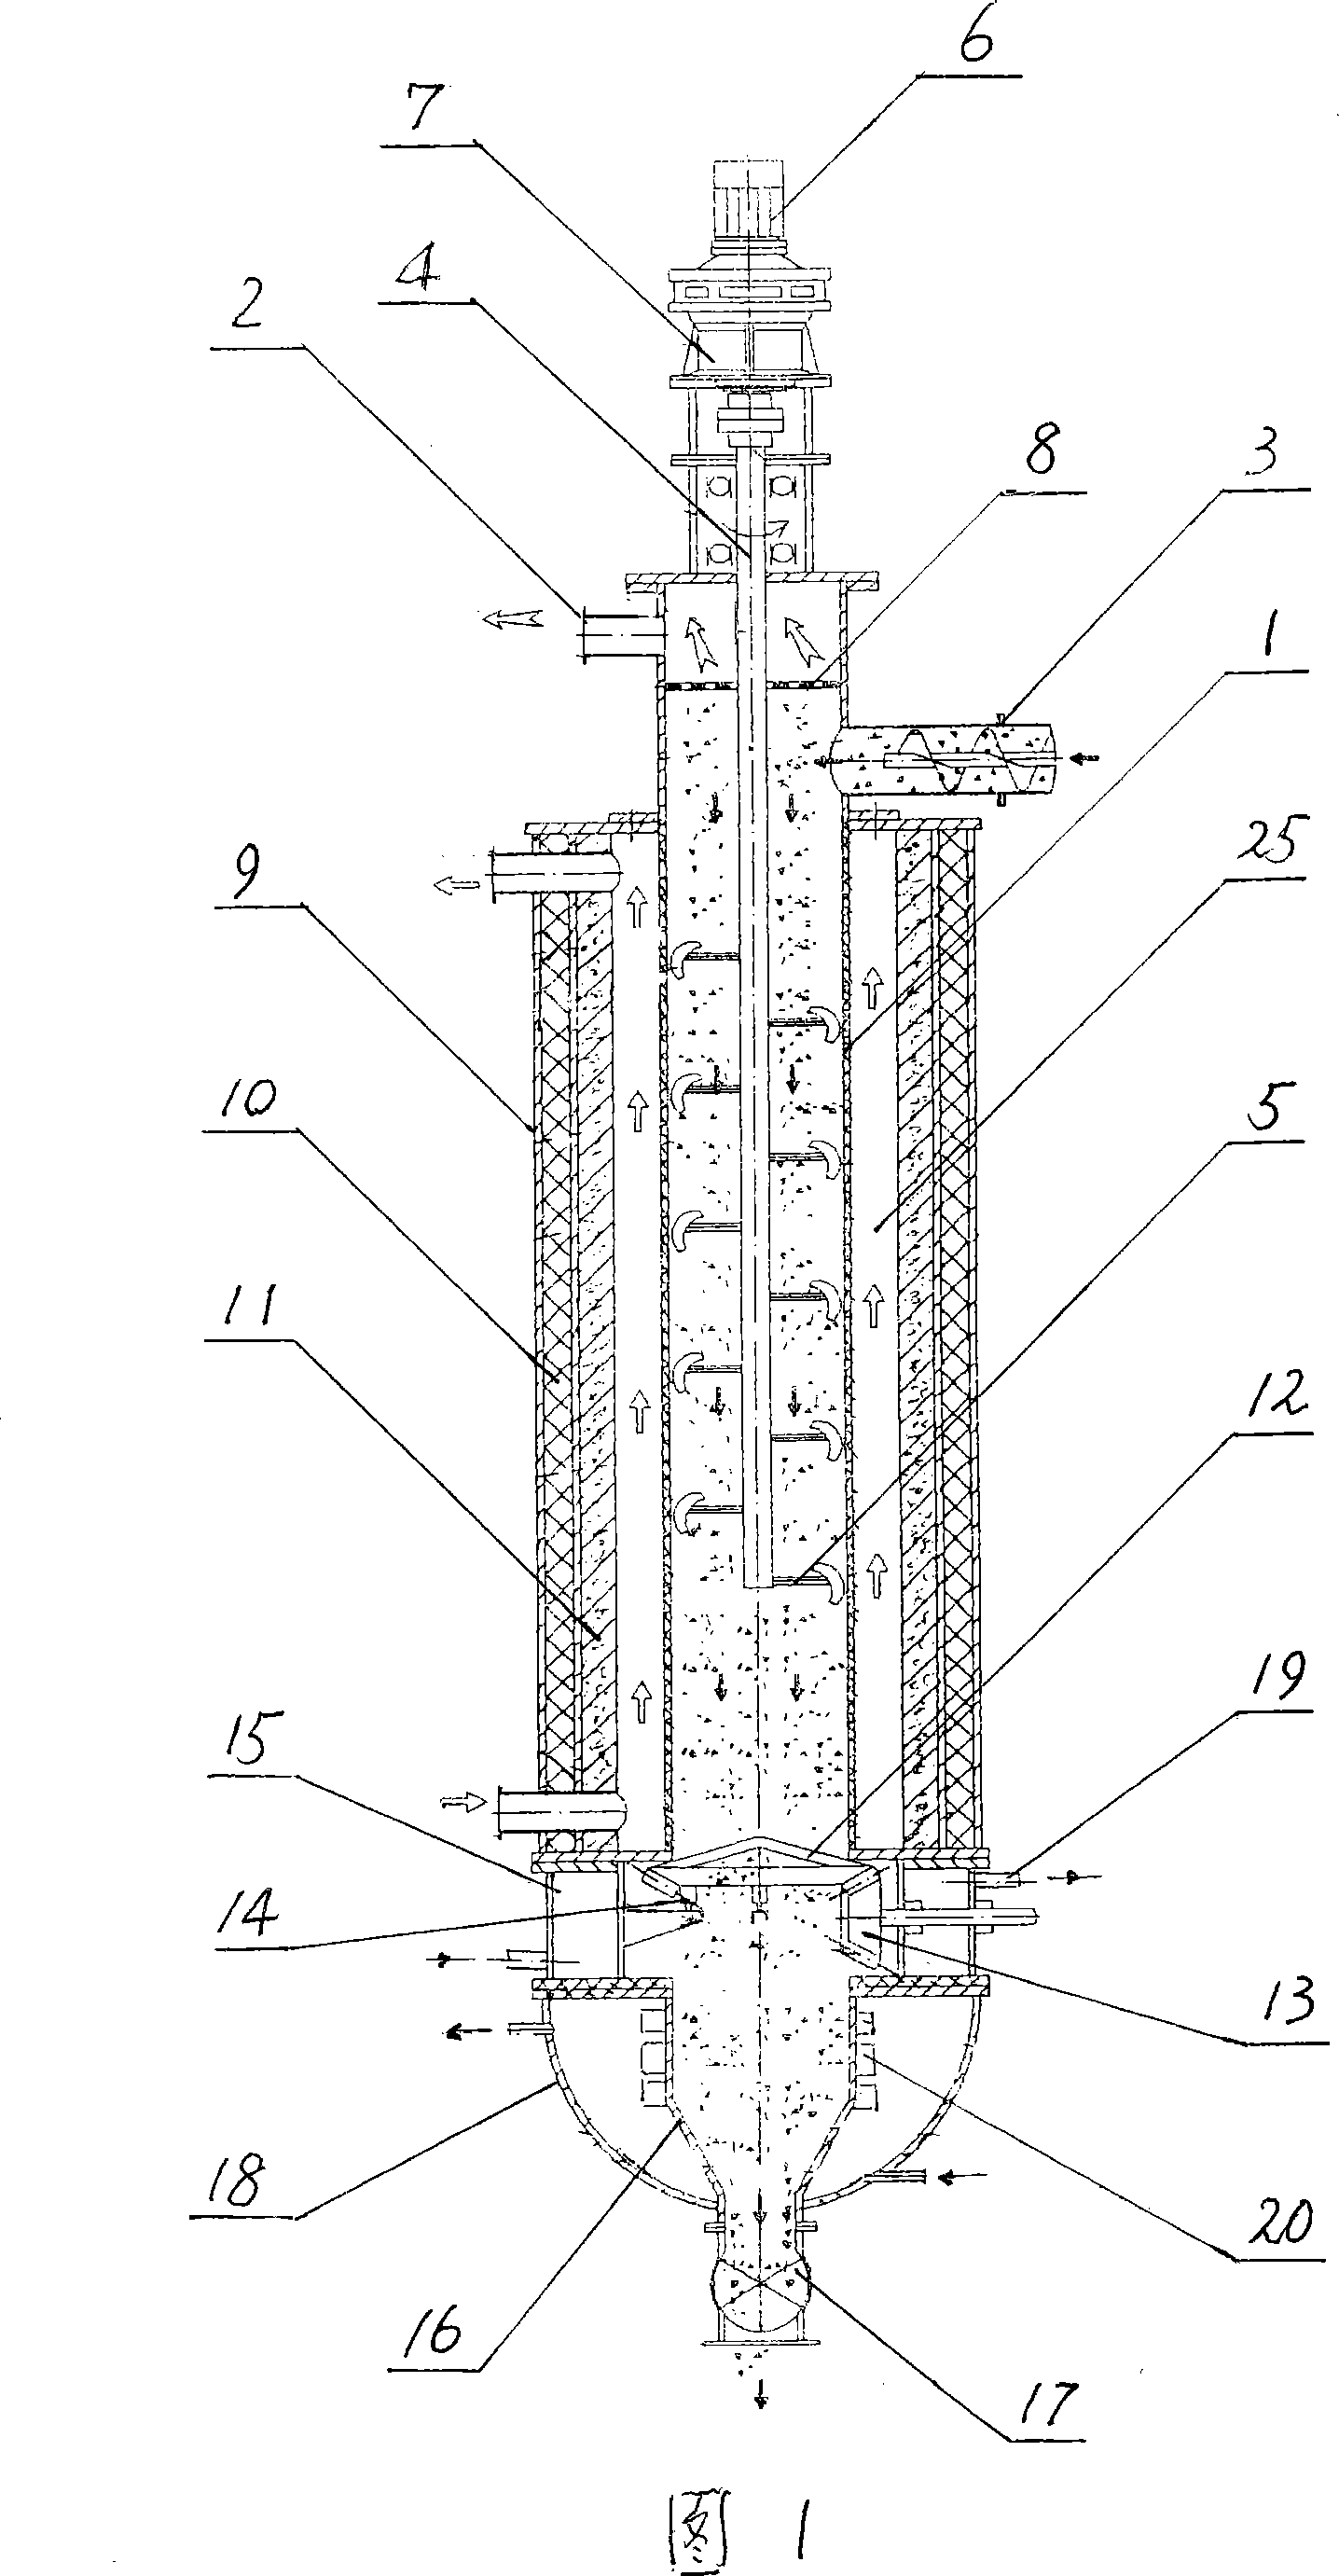 Solid biomass upright continuous retorting device